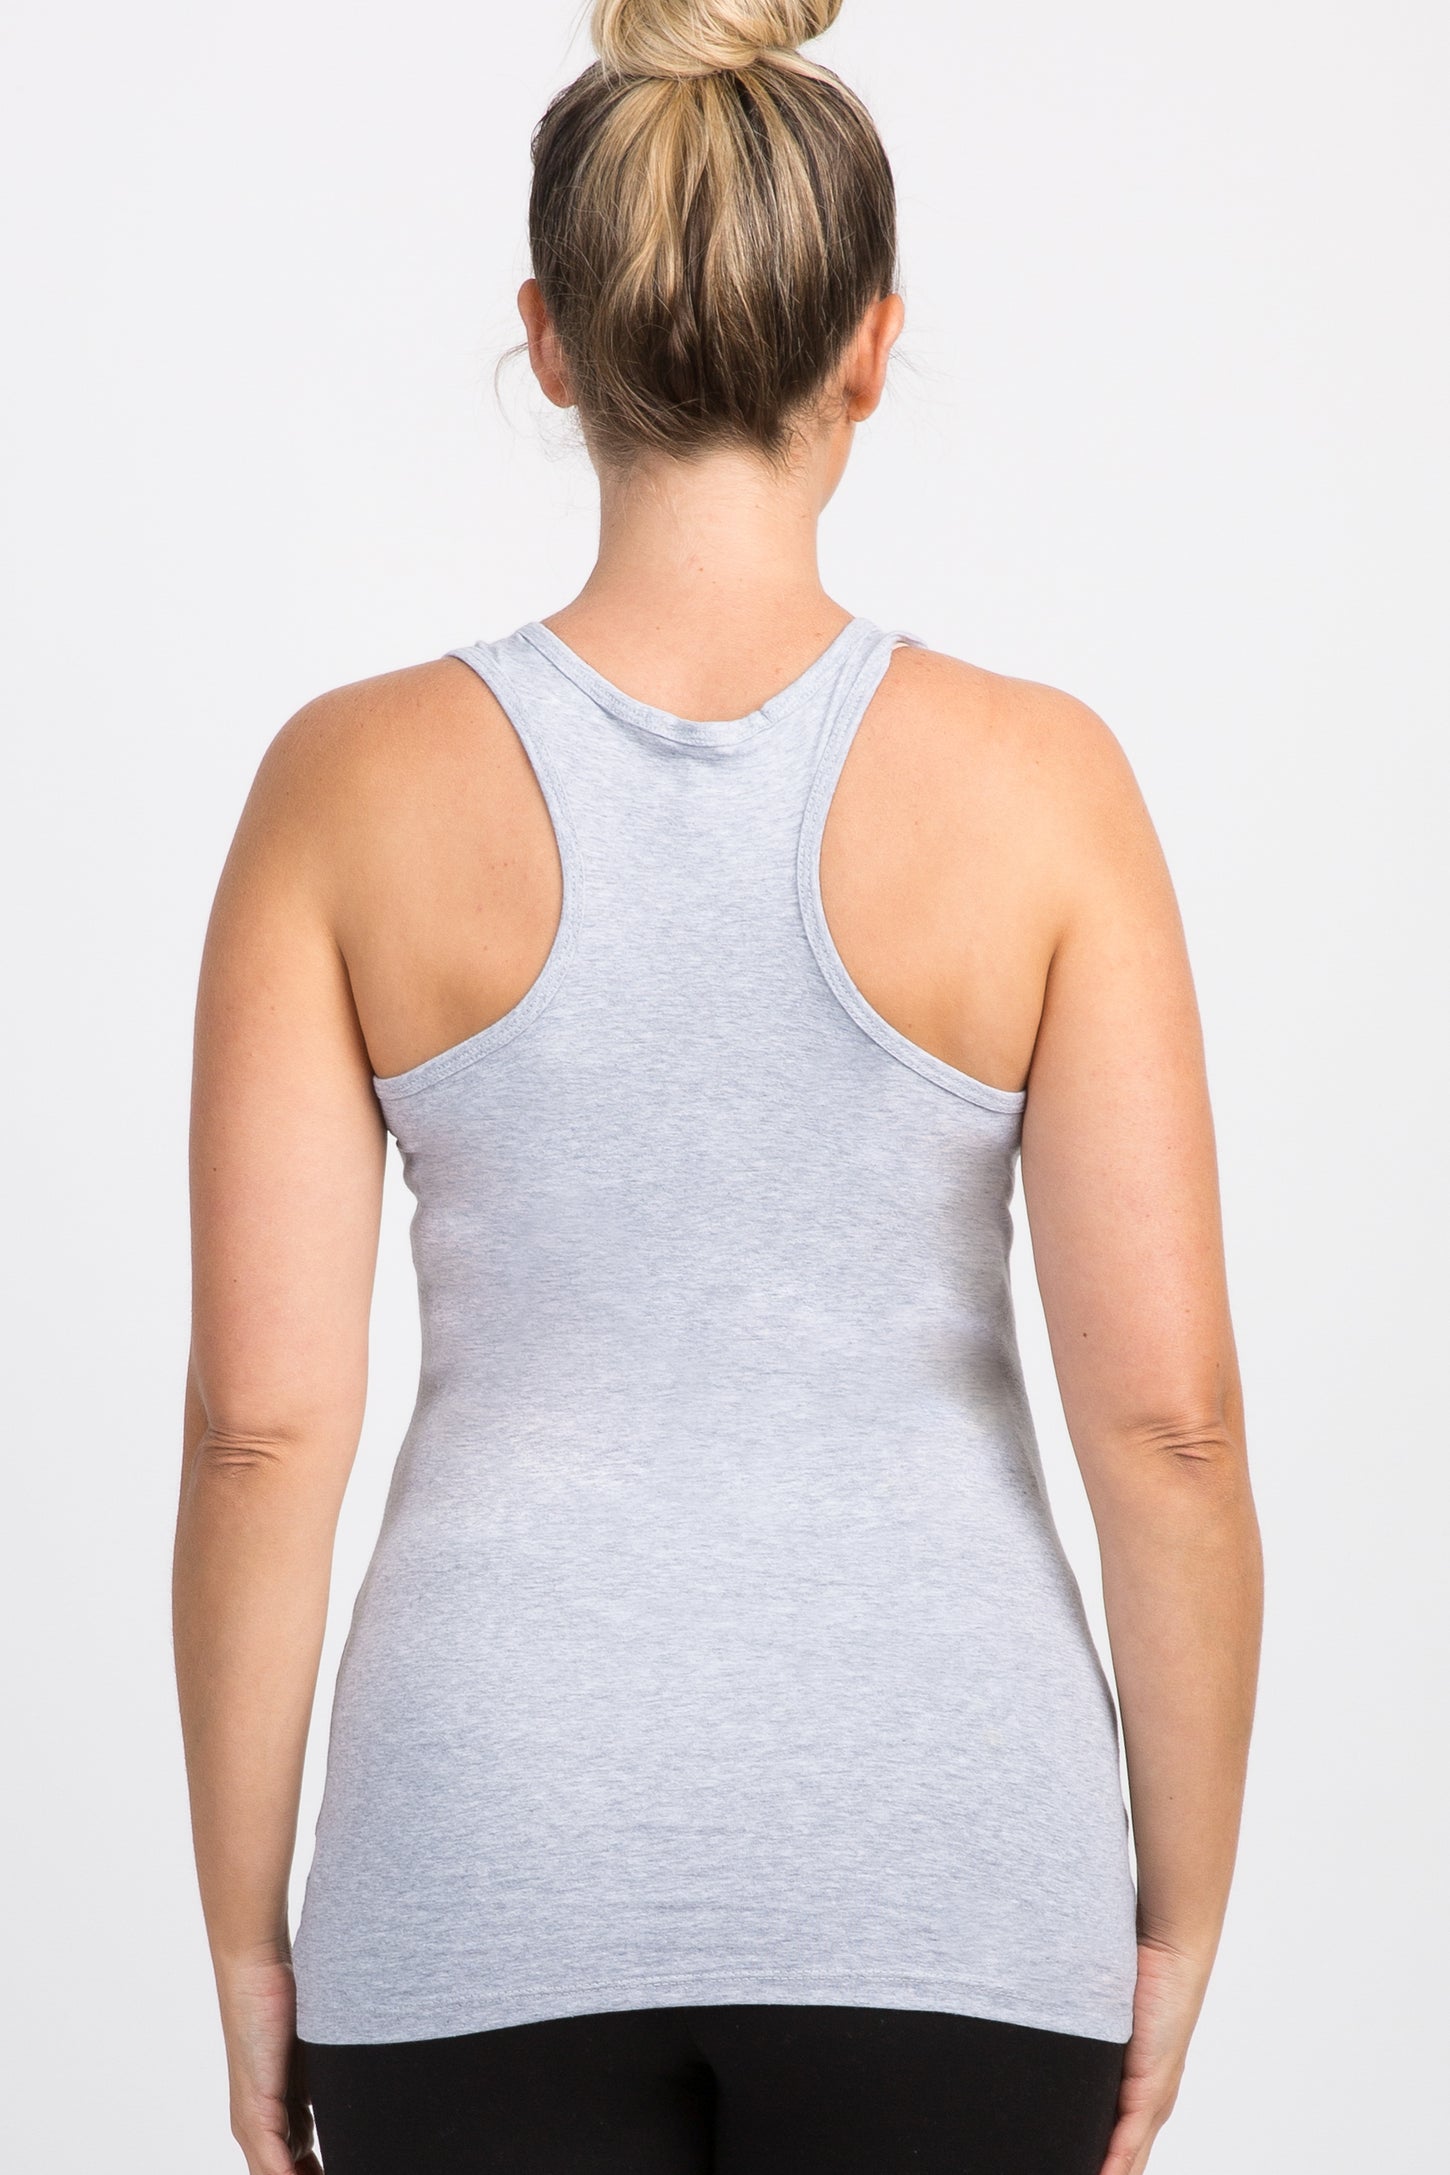 Heather Grey Fitted Maternity Tank Top